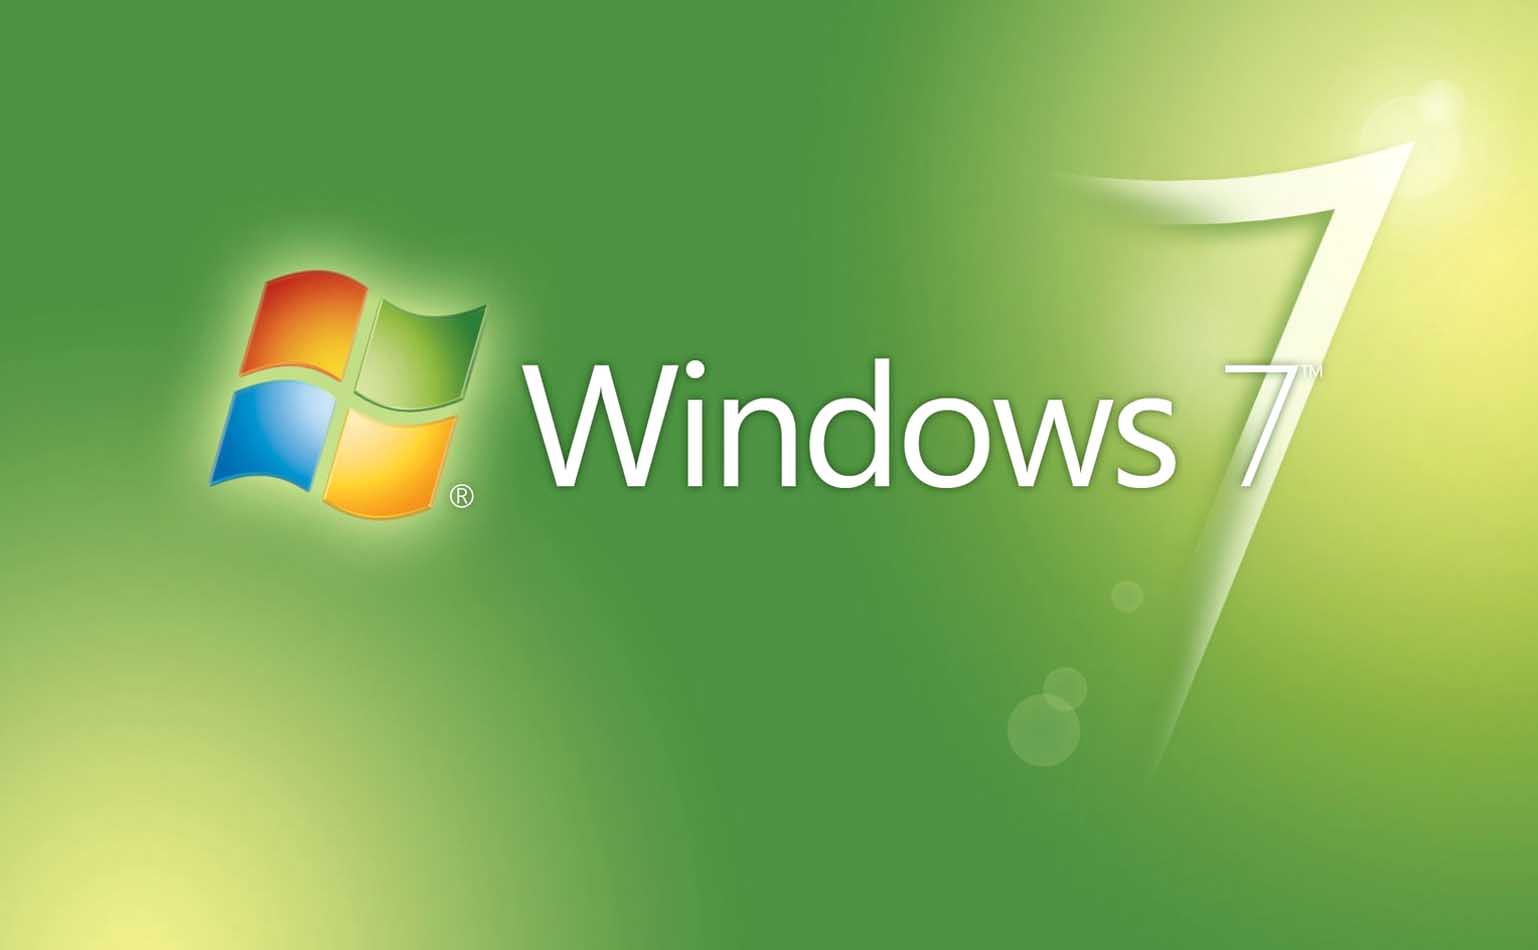 Wallpapers for windows 7 ultimate free download